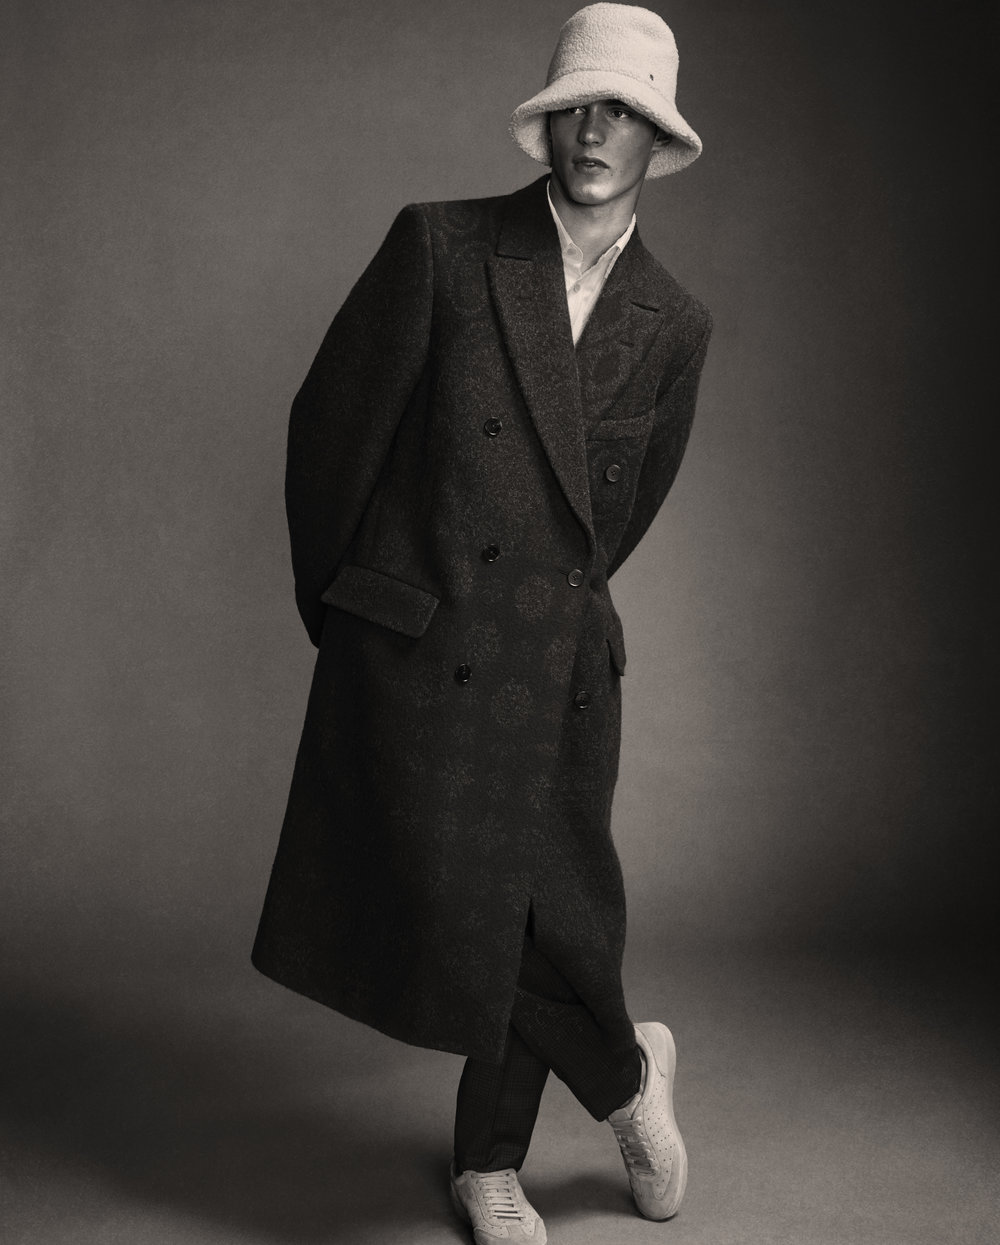 WOOL Issue 4 with Kit Butler a New Season Style - Fashionably Male